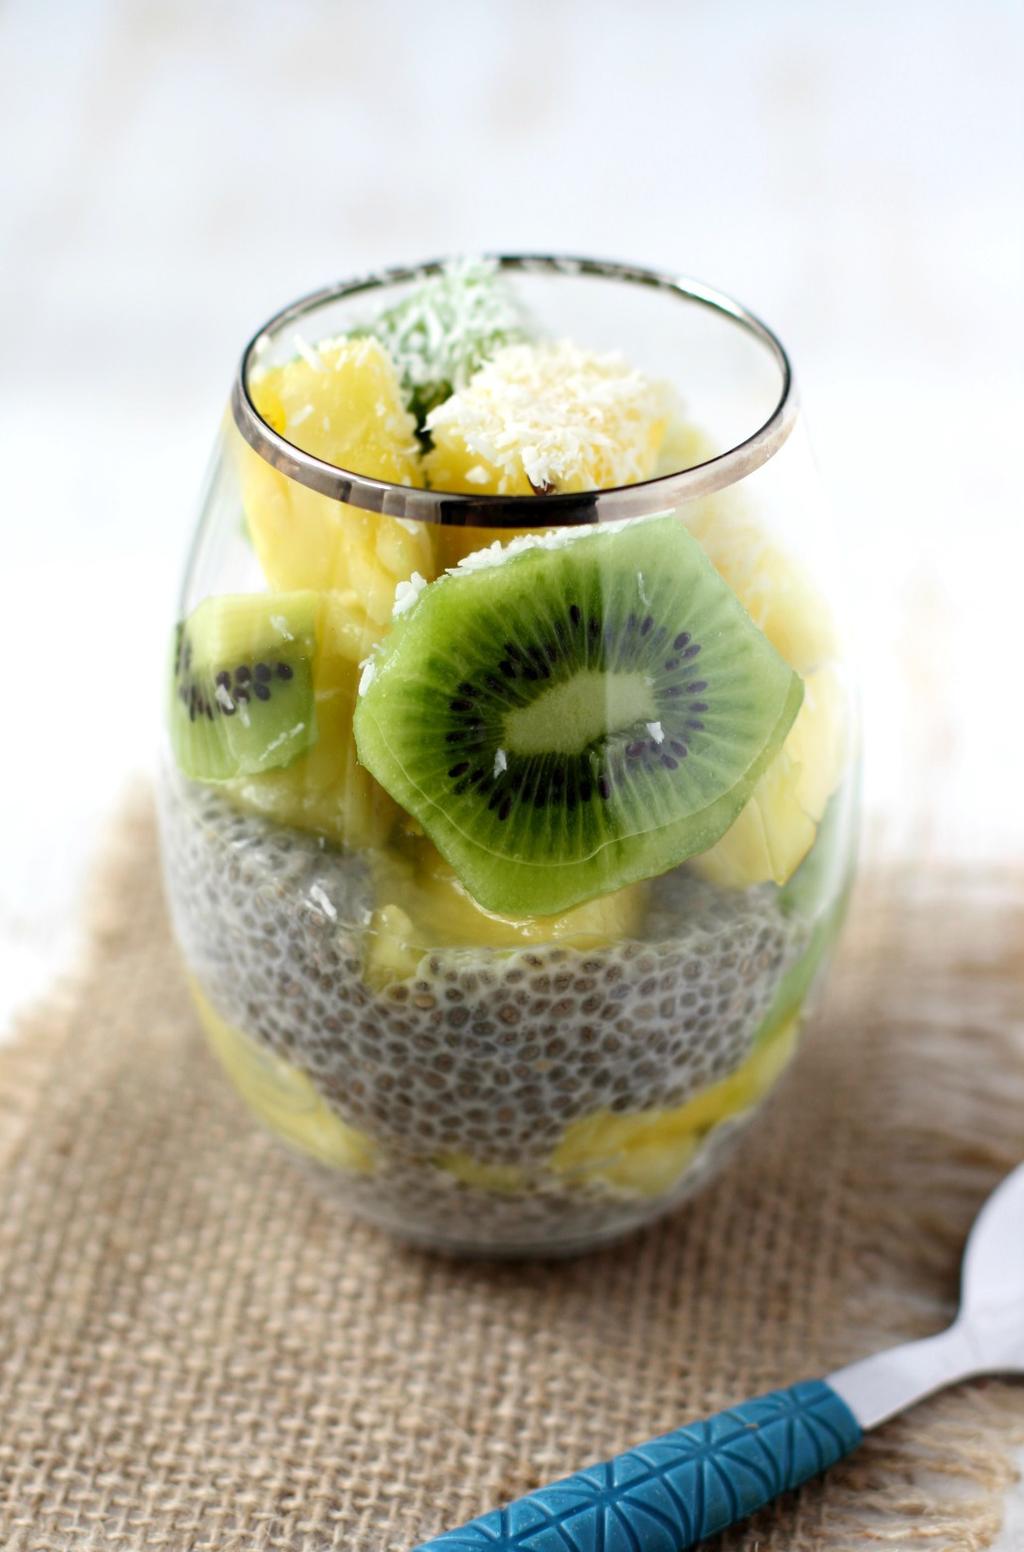 Tropical Chia Seed Pudding 1 cup unsweetened coconut milk beverage 5½ Tablespoons chia seeds 3 Tablespoons maple syrup 1½ teaspoons vanilla extract 2 kiwi fruit, sliced 1 cup pineapple, diced 2